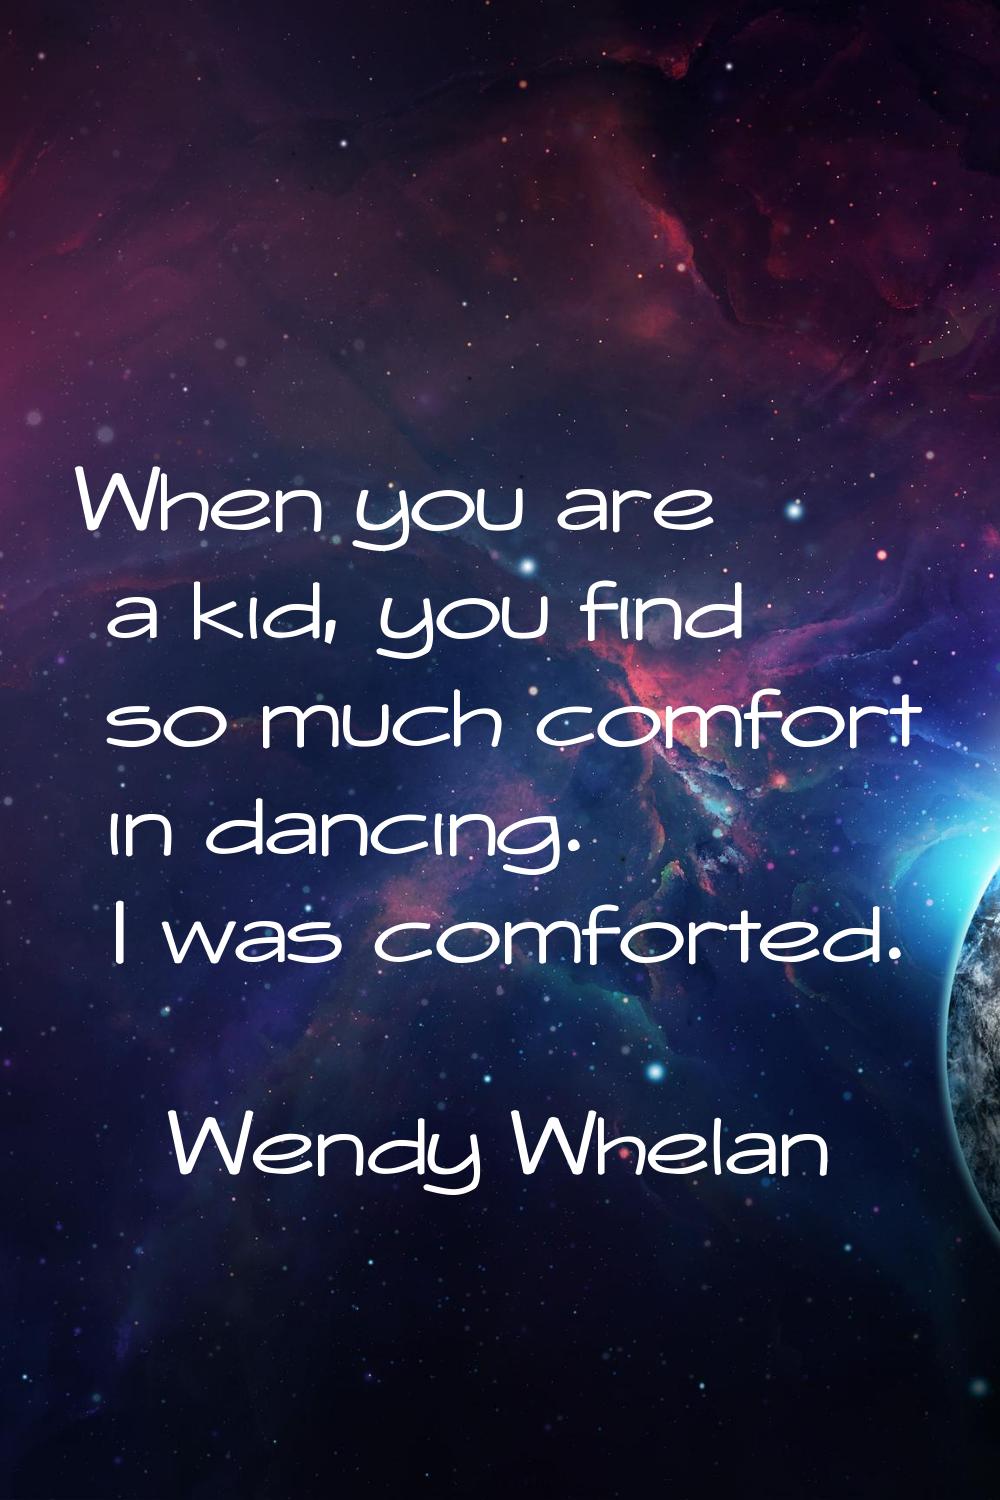 When you are a kid, you find so much comfort in dancing. I was comforted.